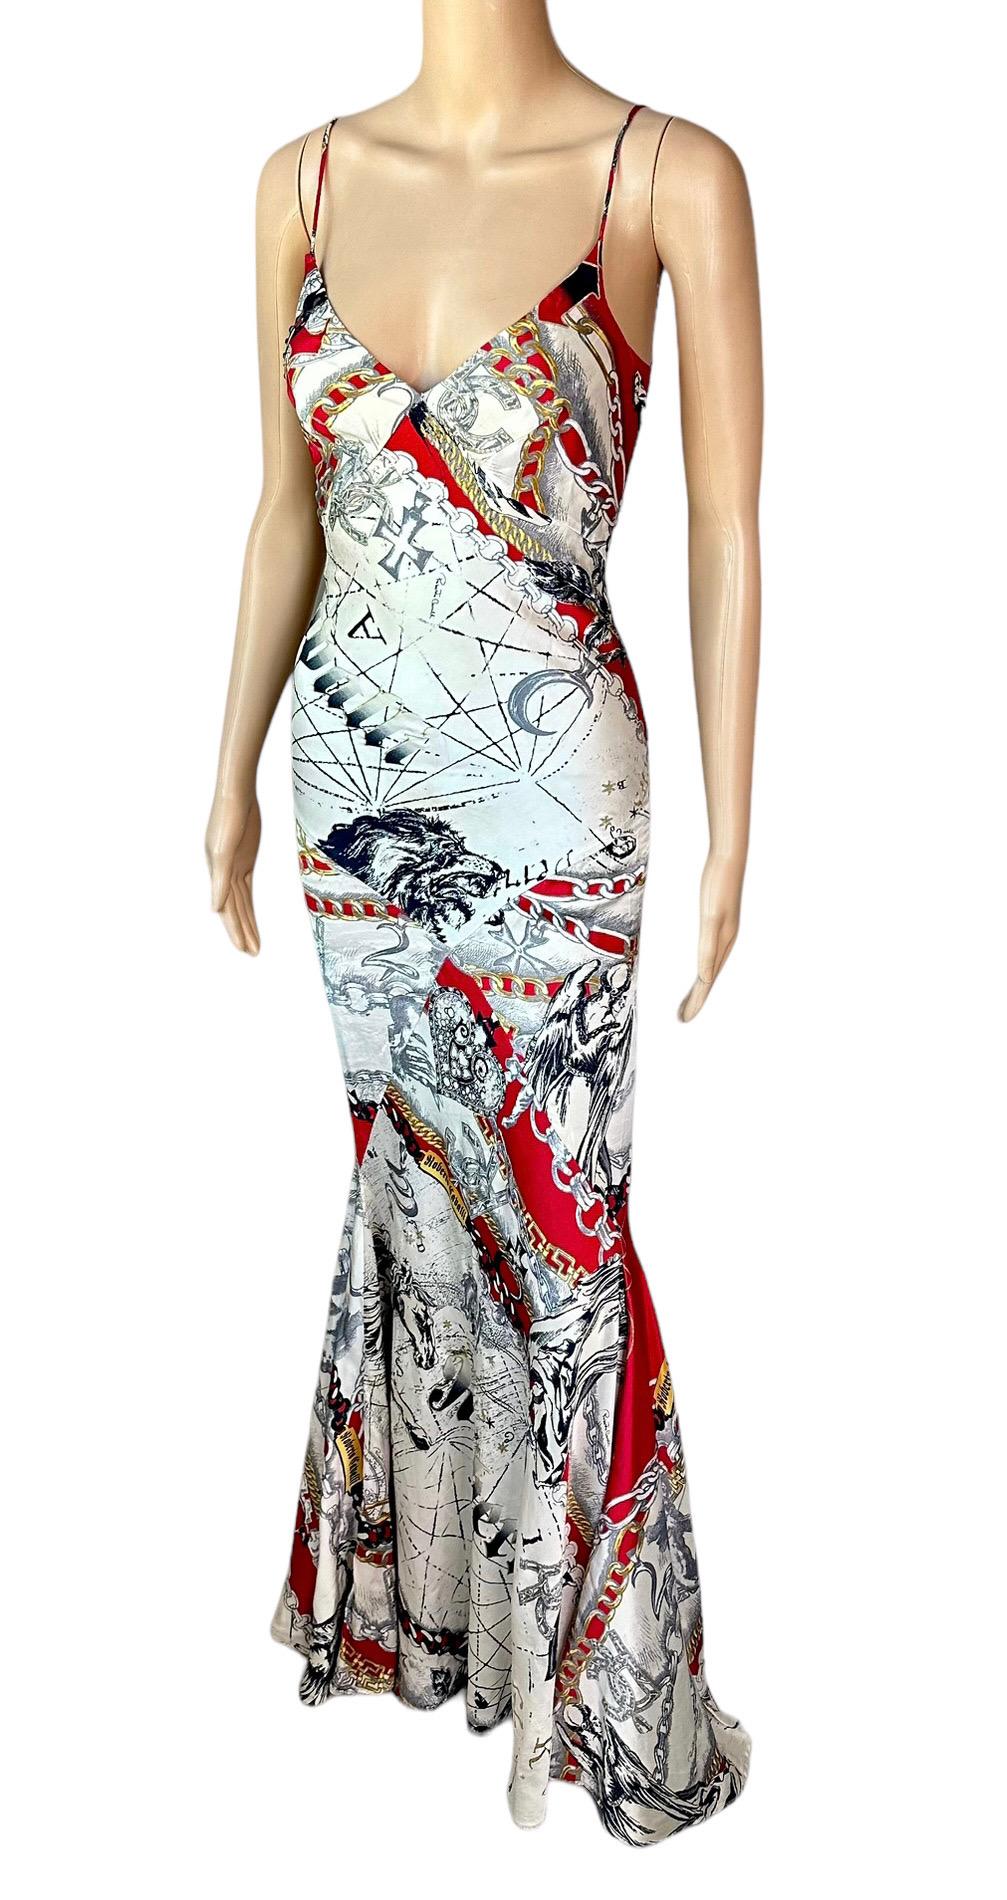 Roberto Cavalli F/W 2003 Constellation Zodiac Print Slip Silk Train Maxi Evening Dress Gown

Condition: Good Vintage Condition, light discoloration on the lower right side, not noticeable when worn due to the intricate print, please see last photo.